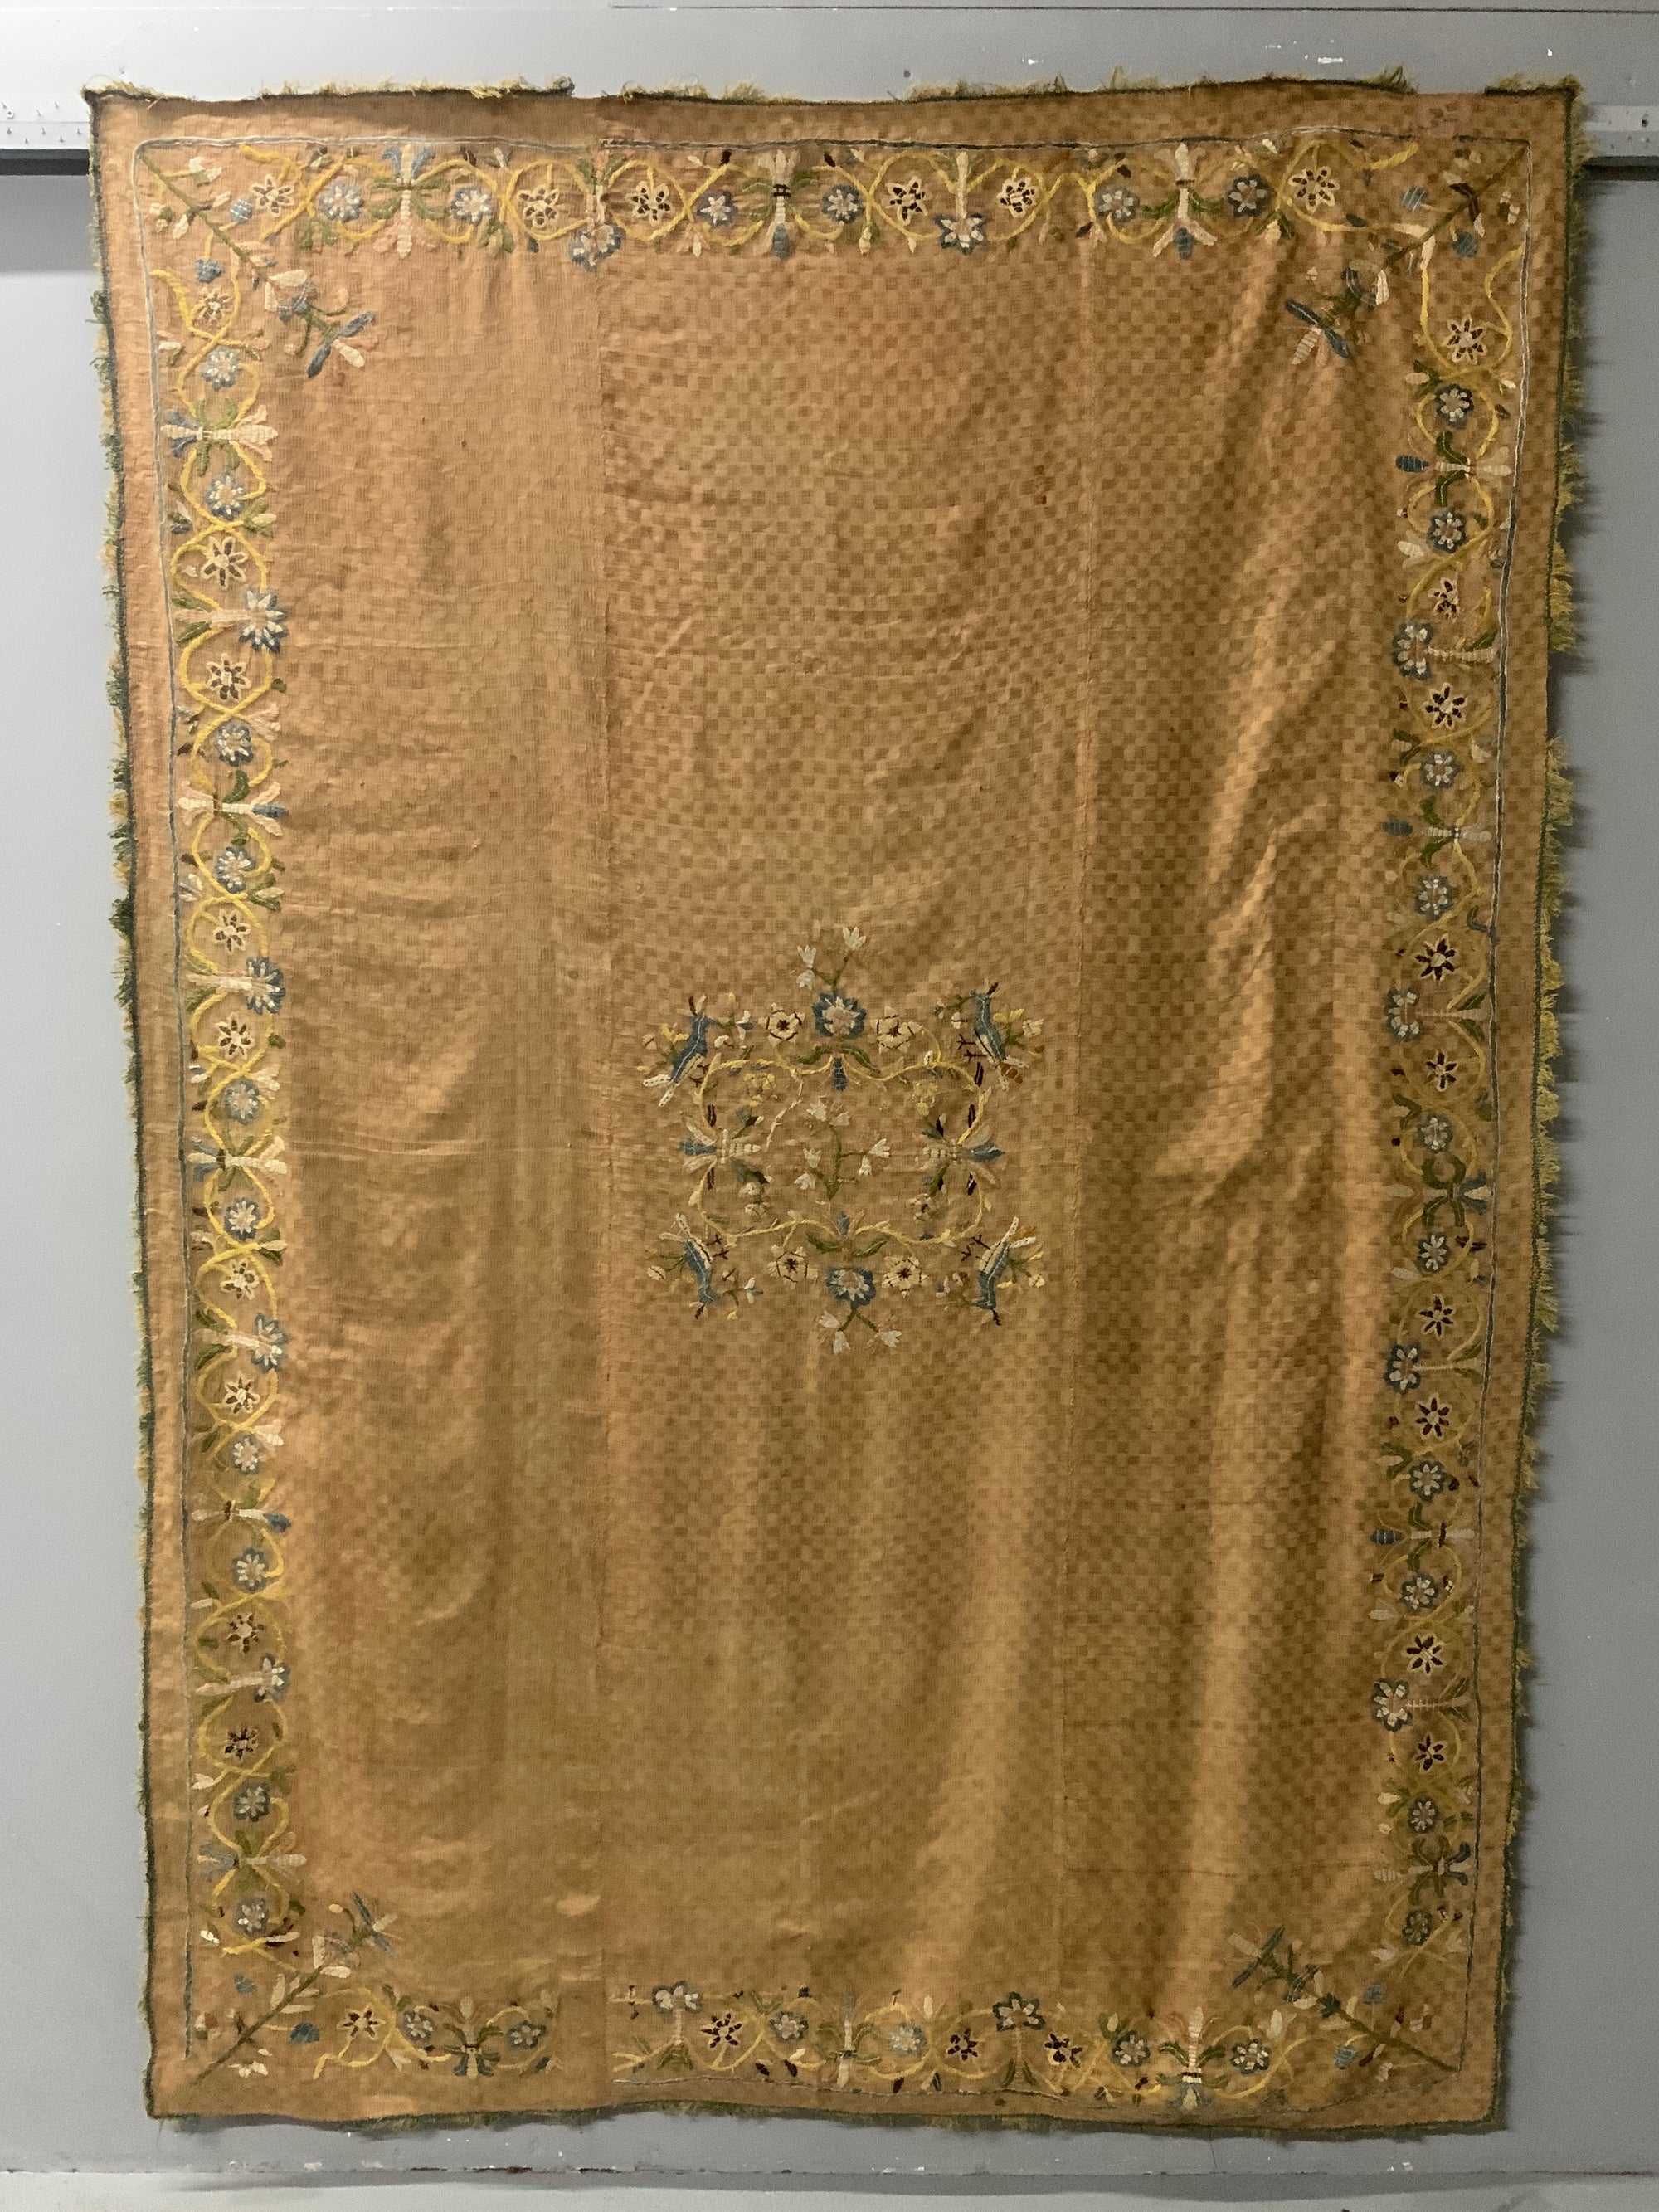 Portuguese or Salamanca embroidered bedcover (226 x 160cm)